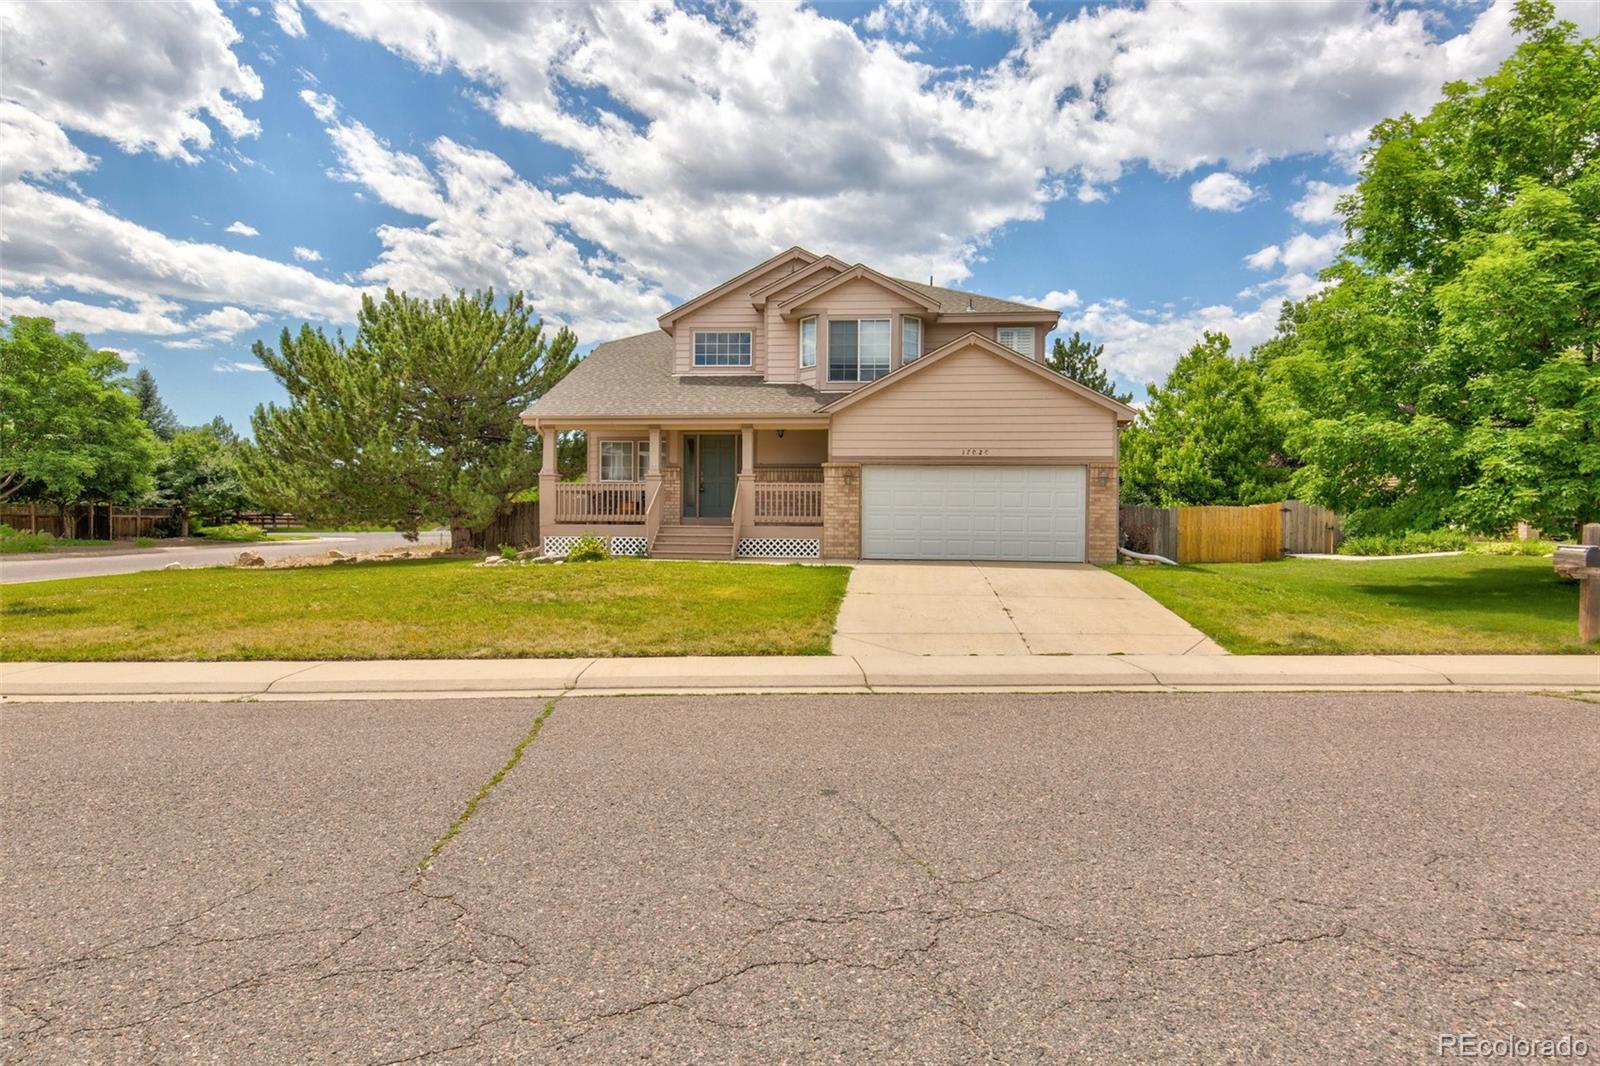 17020 W 64th Drive, arvada MLS: 1527473 Beds: 4 Baths: 3 Price: $695,000